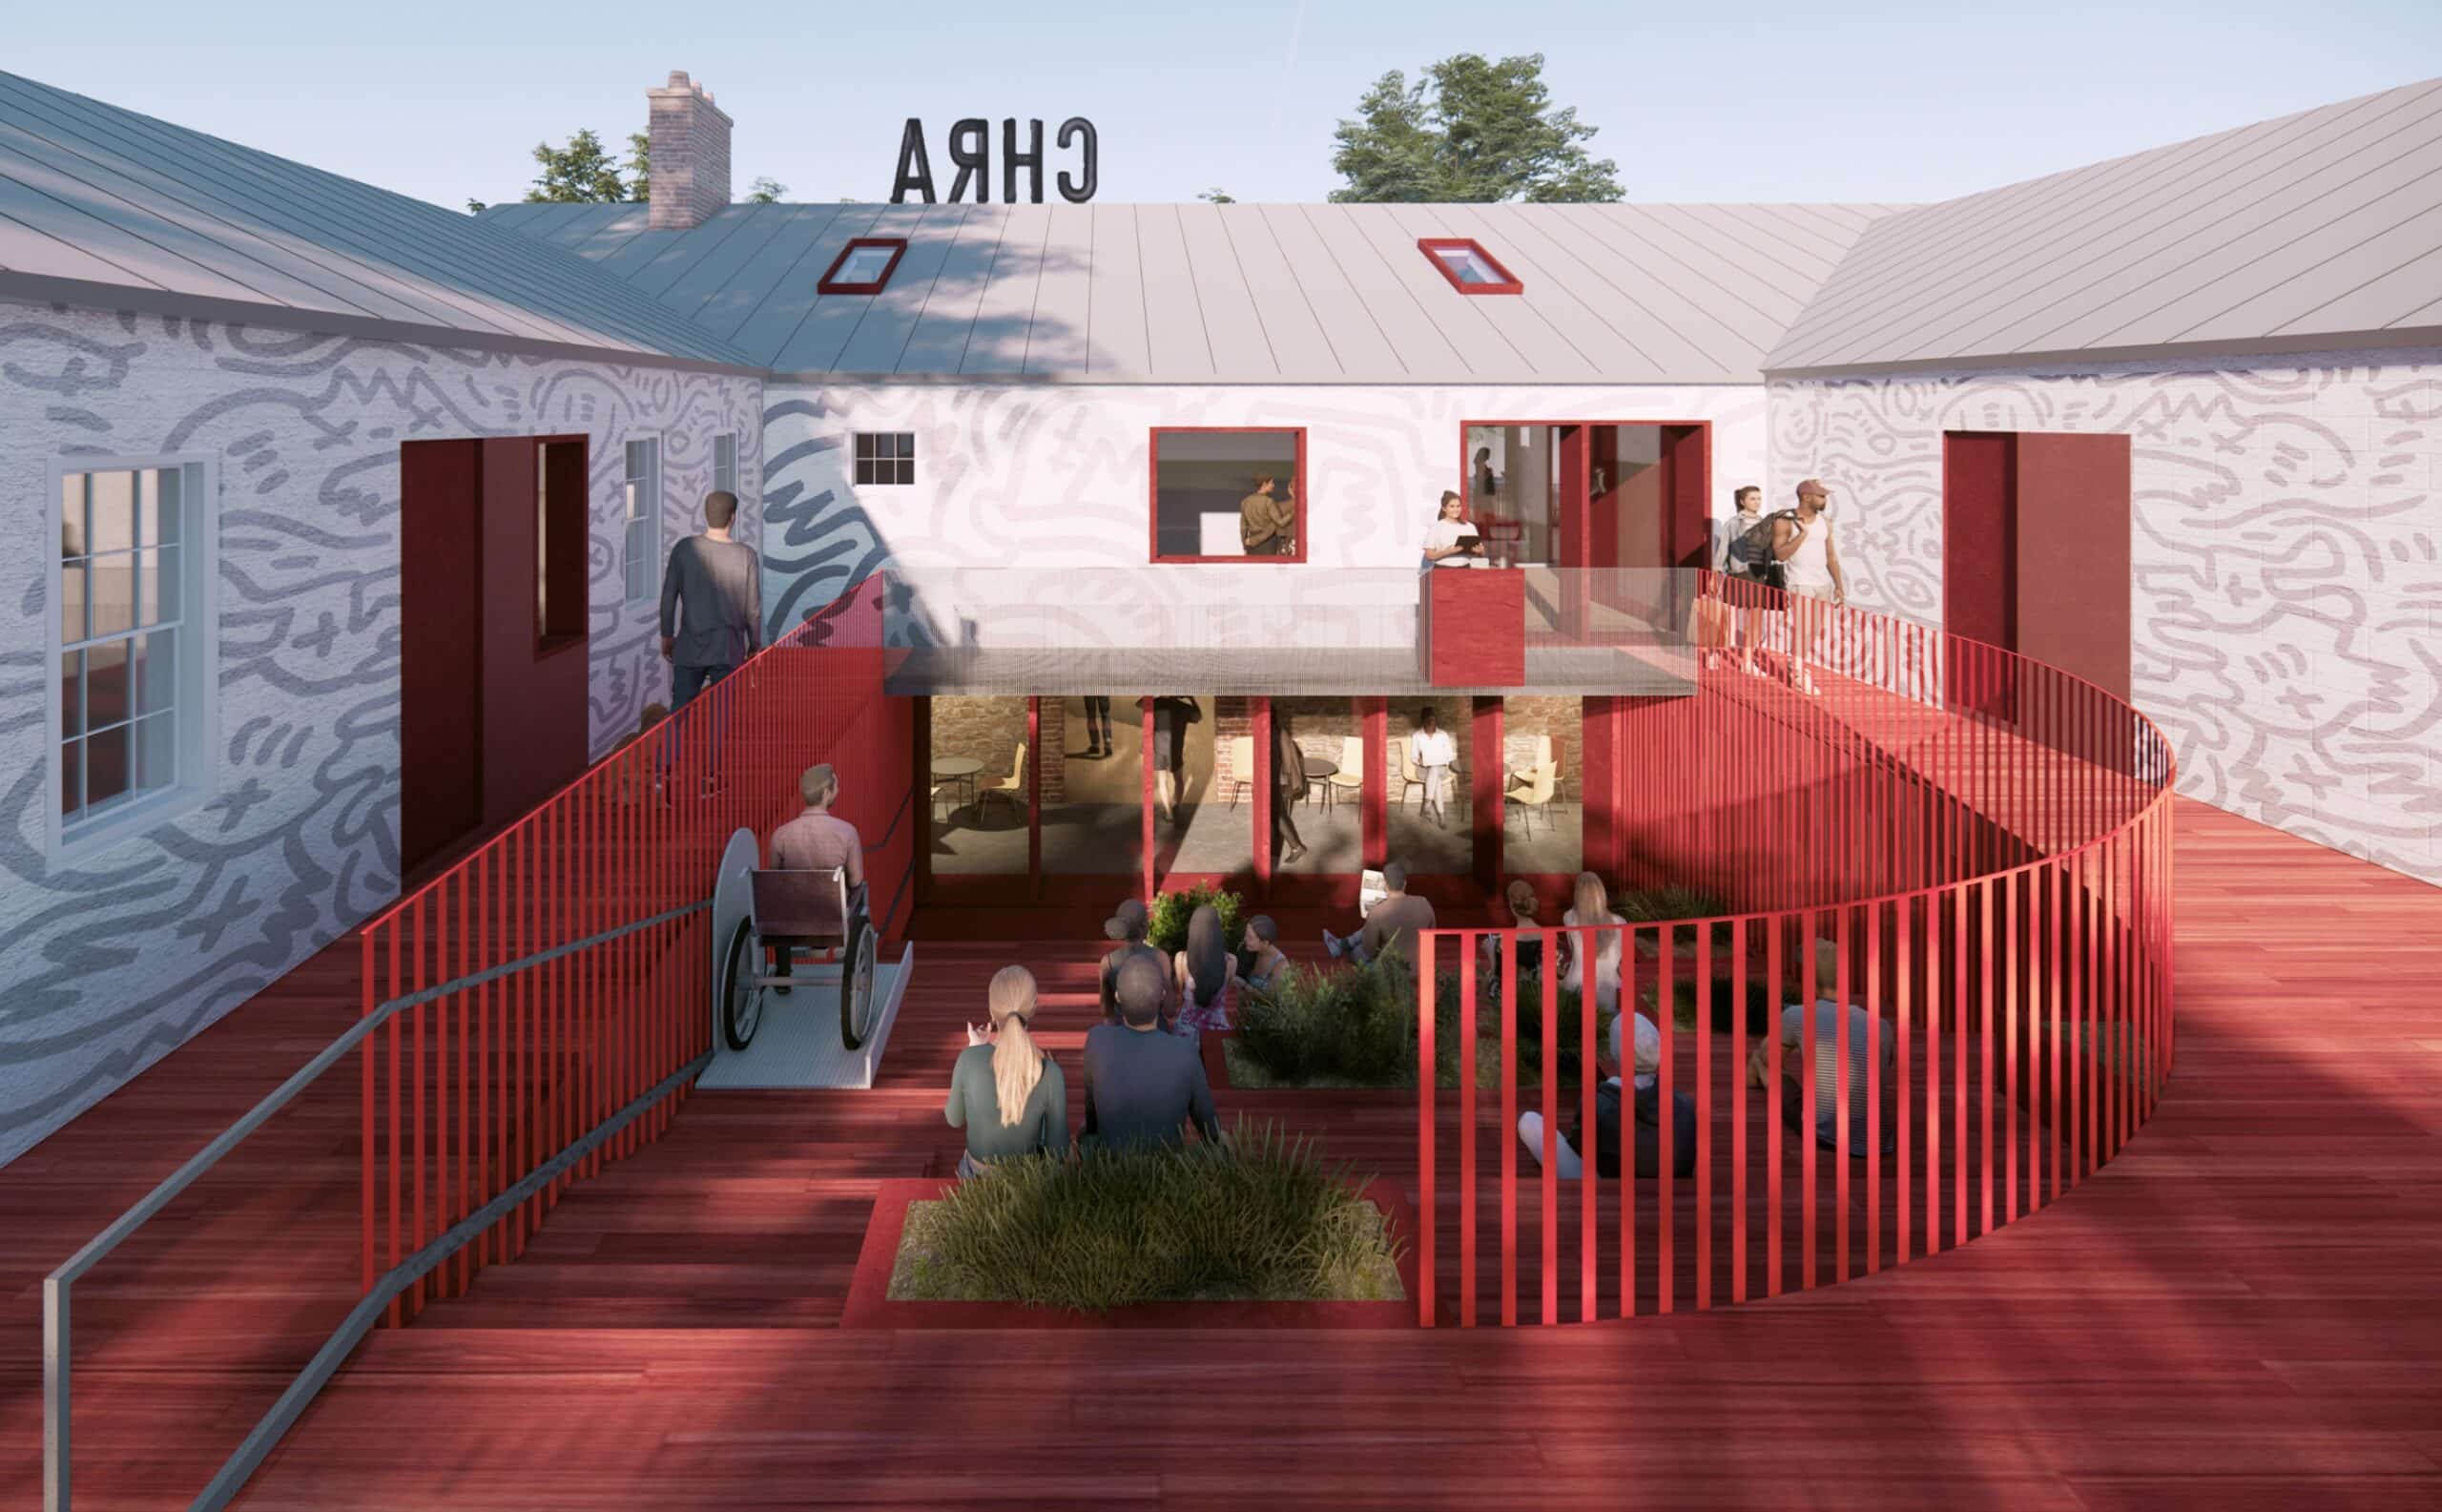 An artist's rendering of a red building with people walking around.